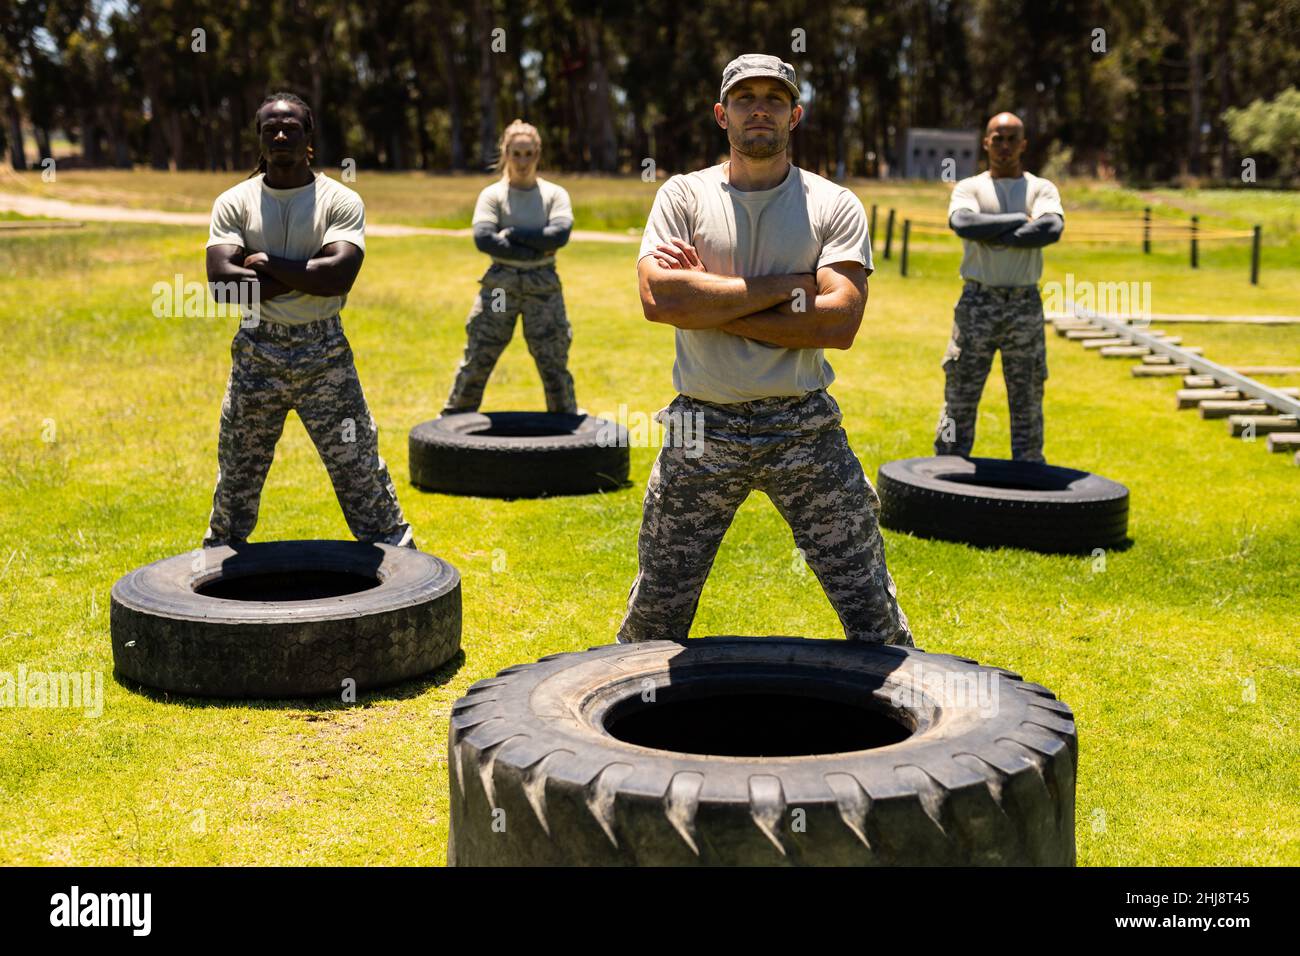 Group of male and female soldiers with arms crossed standing on tire obstacle course at boot camp Stock Photo